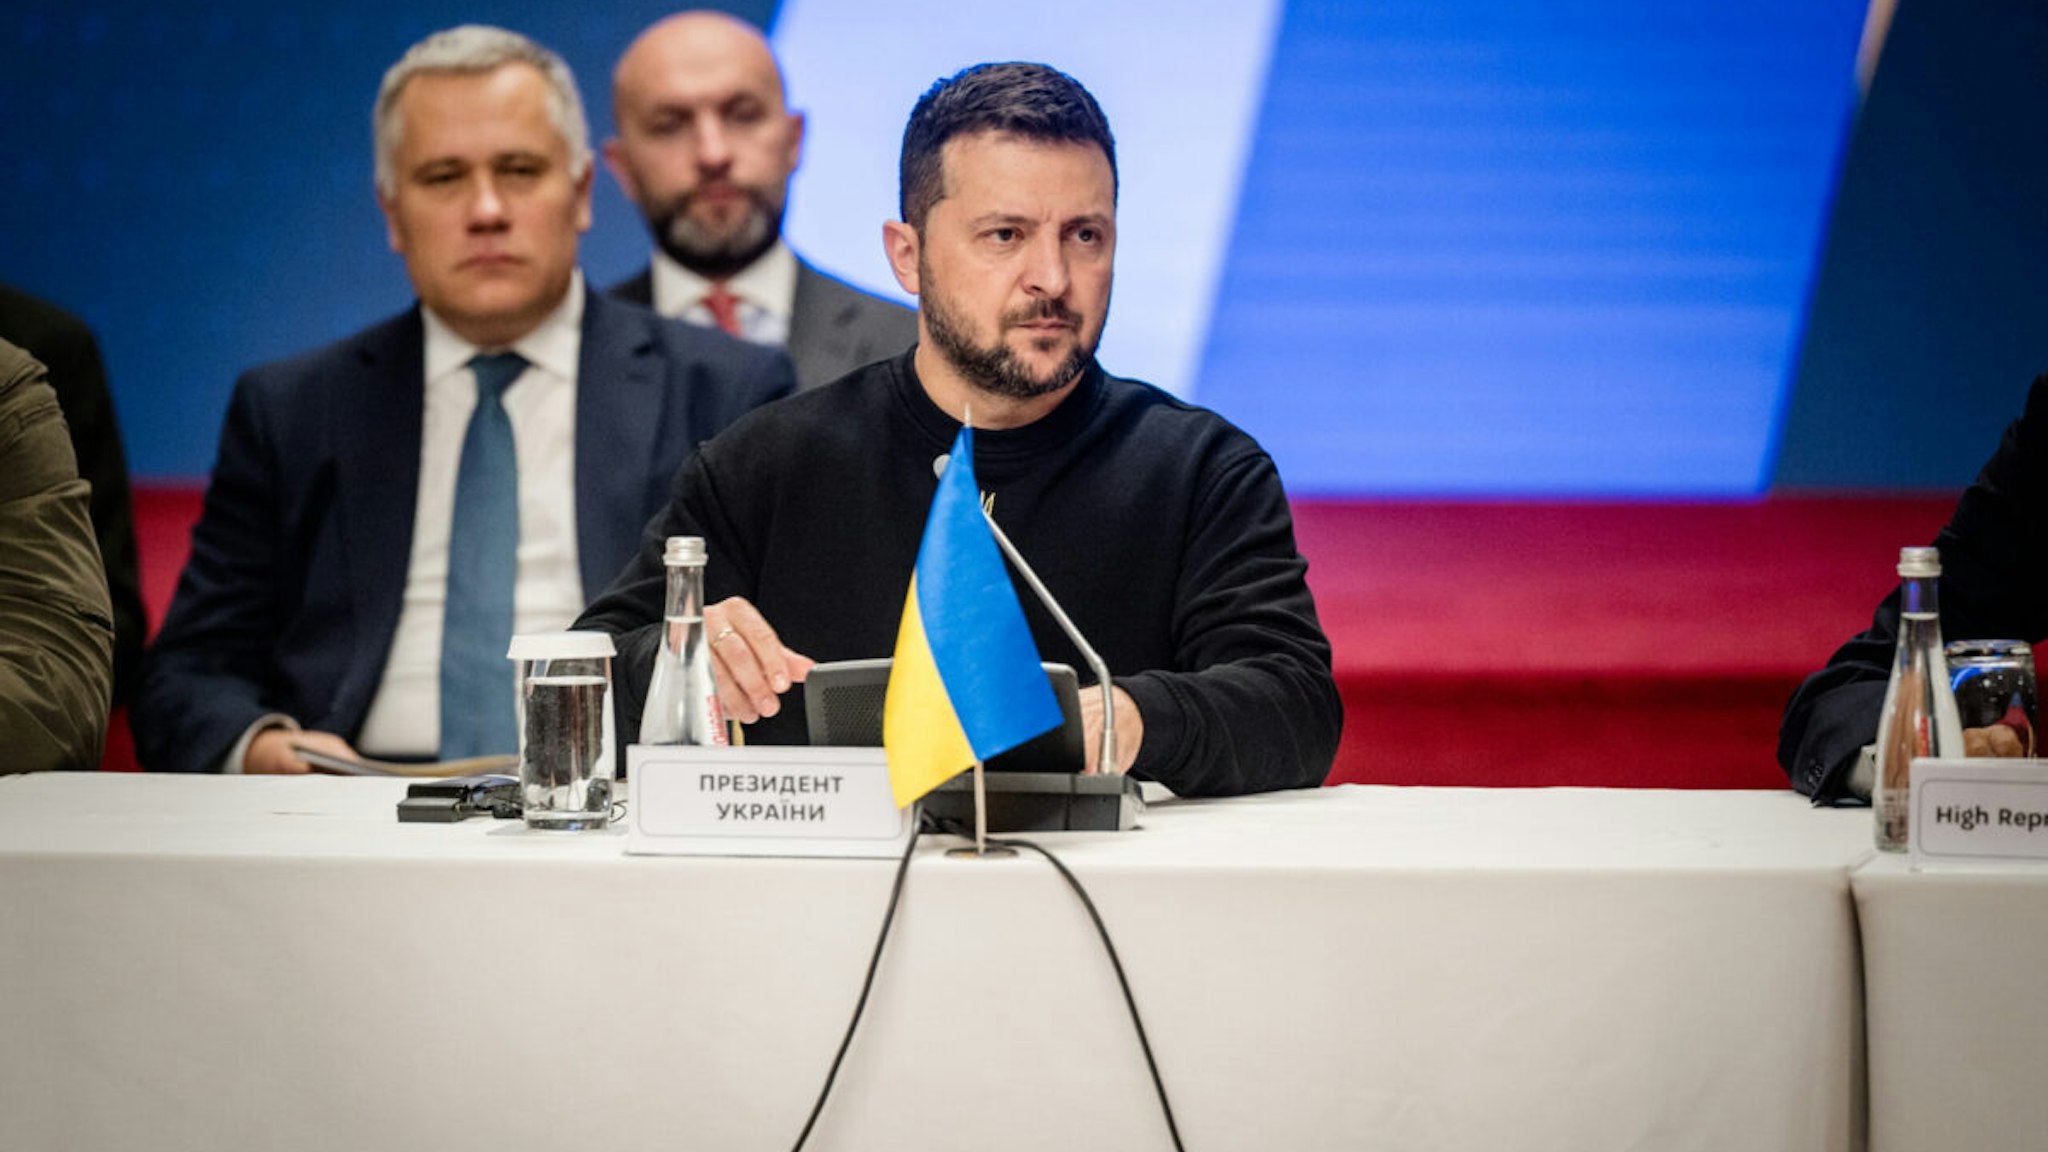 KYIV, UKRAINE - OCTOBER 2: President of Ukraine Volodymyr Zelenskyi during Informal EU Foreign Ministers Council on October 2, 2023 in Kyiv, Ukraine. High Representative of the Union for Foreign Affairs and Security Policy Josep Borrell said that the Ukrainian peace formula presented by President Volodymyr Zelenskyi last October will be discussed at an informal meeting in Kyiv of the heads of foreign affairs of the European Union member states.